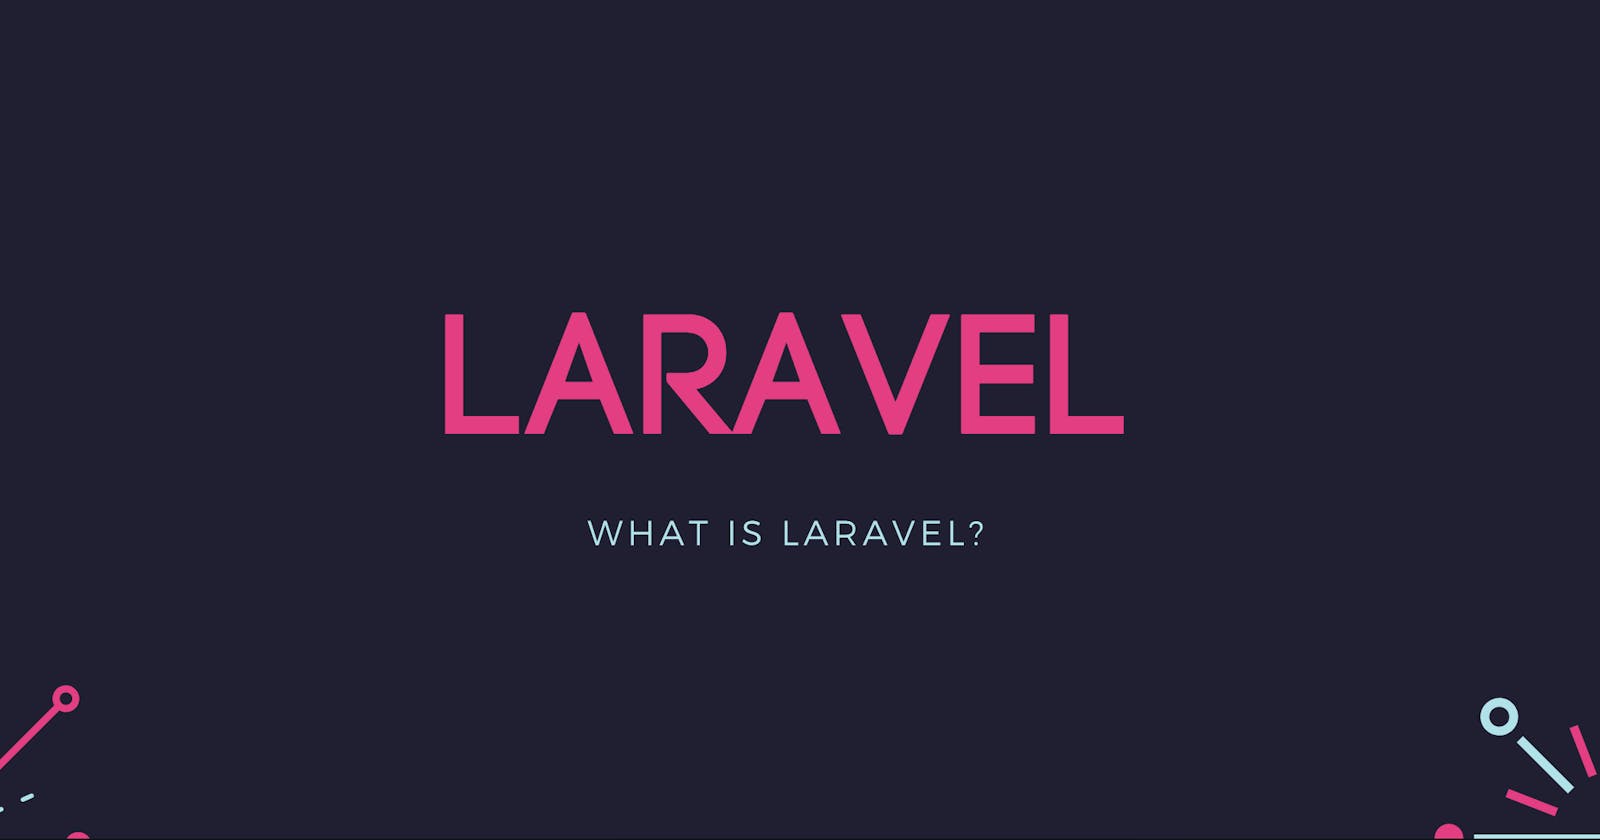 Why Laravel is the best framework to start and learn if you're trying to build production-ready apps